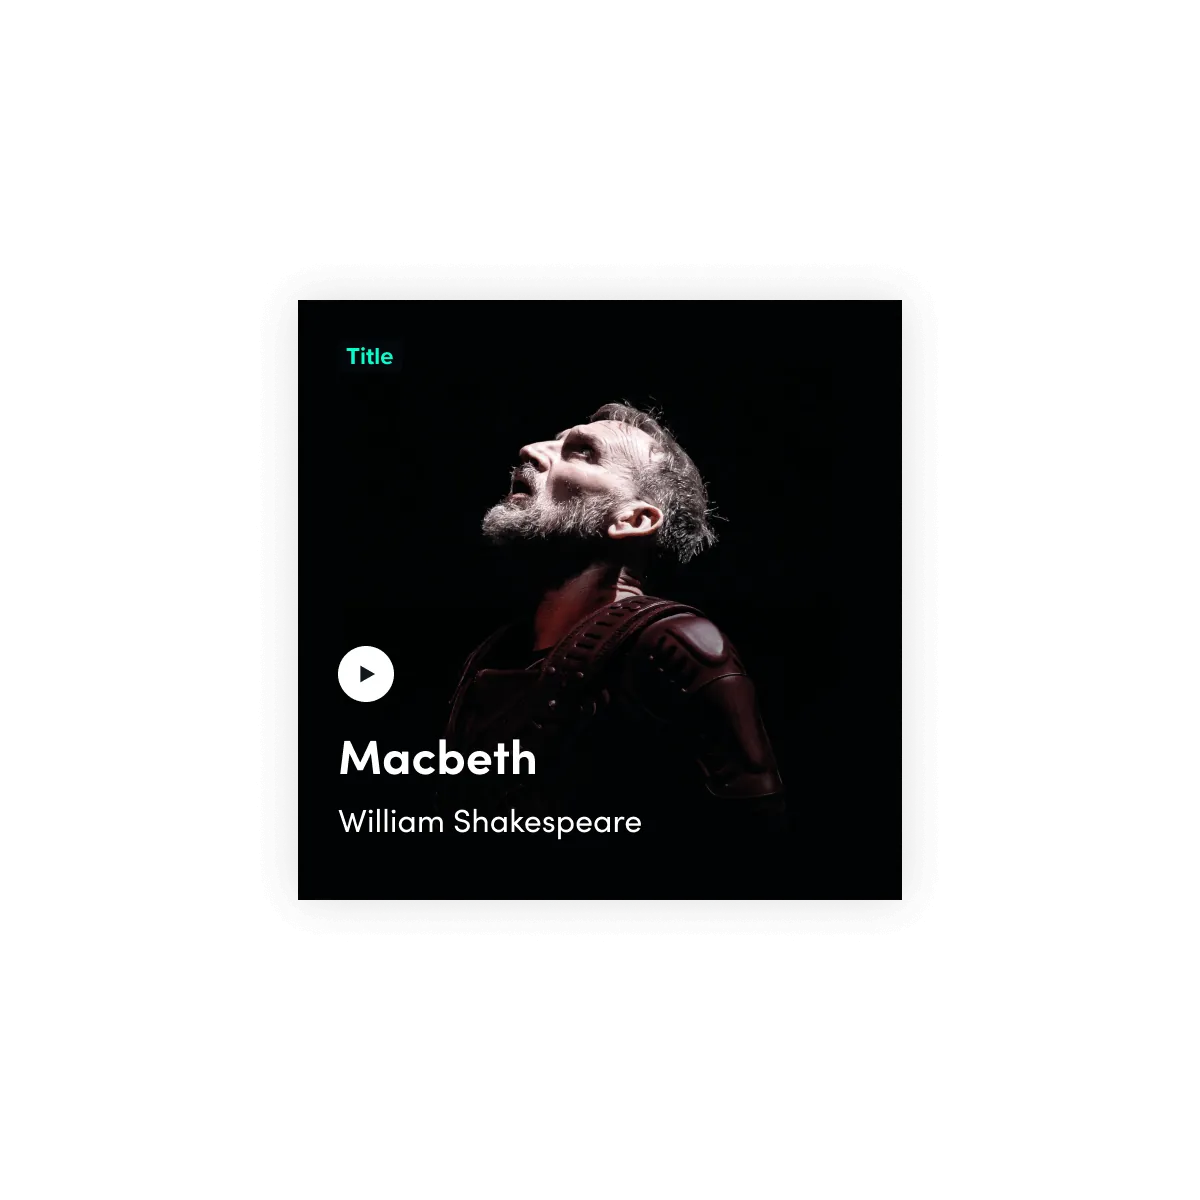 Tile image, Title, Man looking up, play logo, Macbeth, William Shakespeare